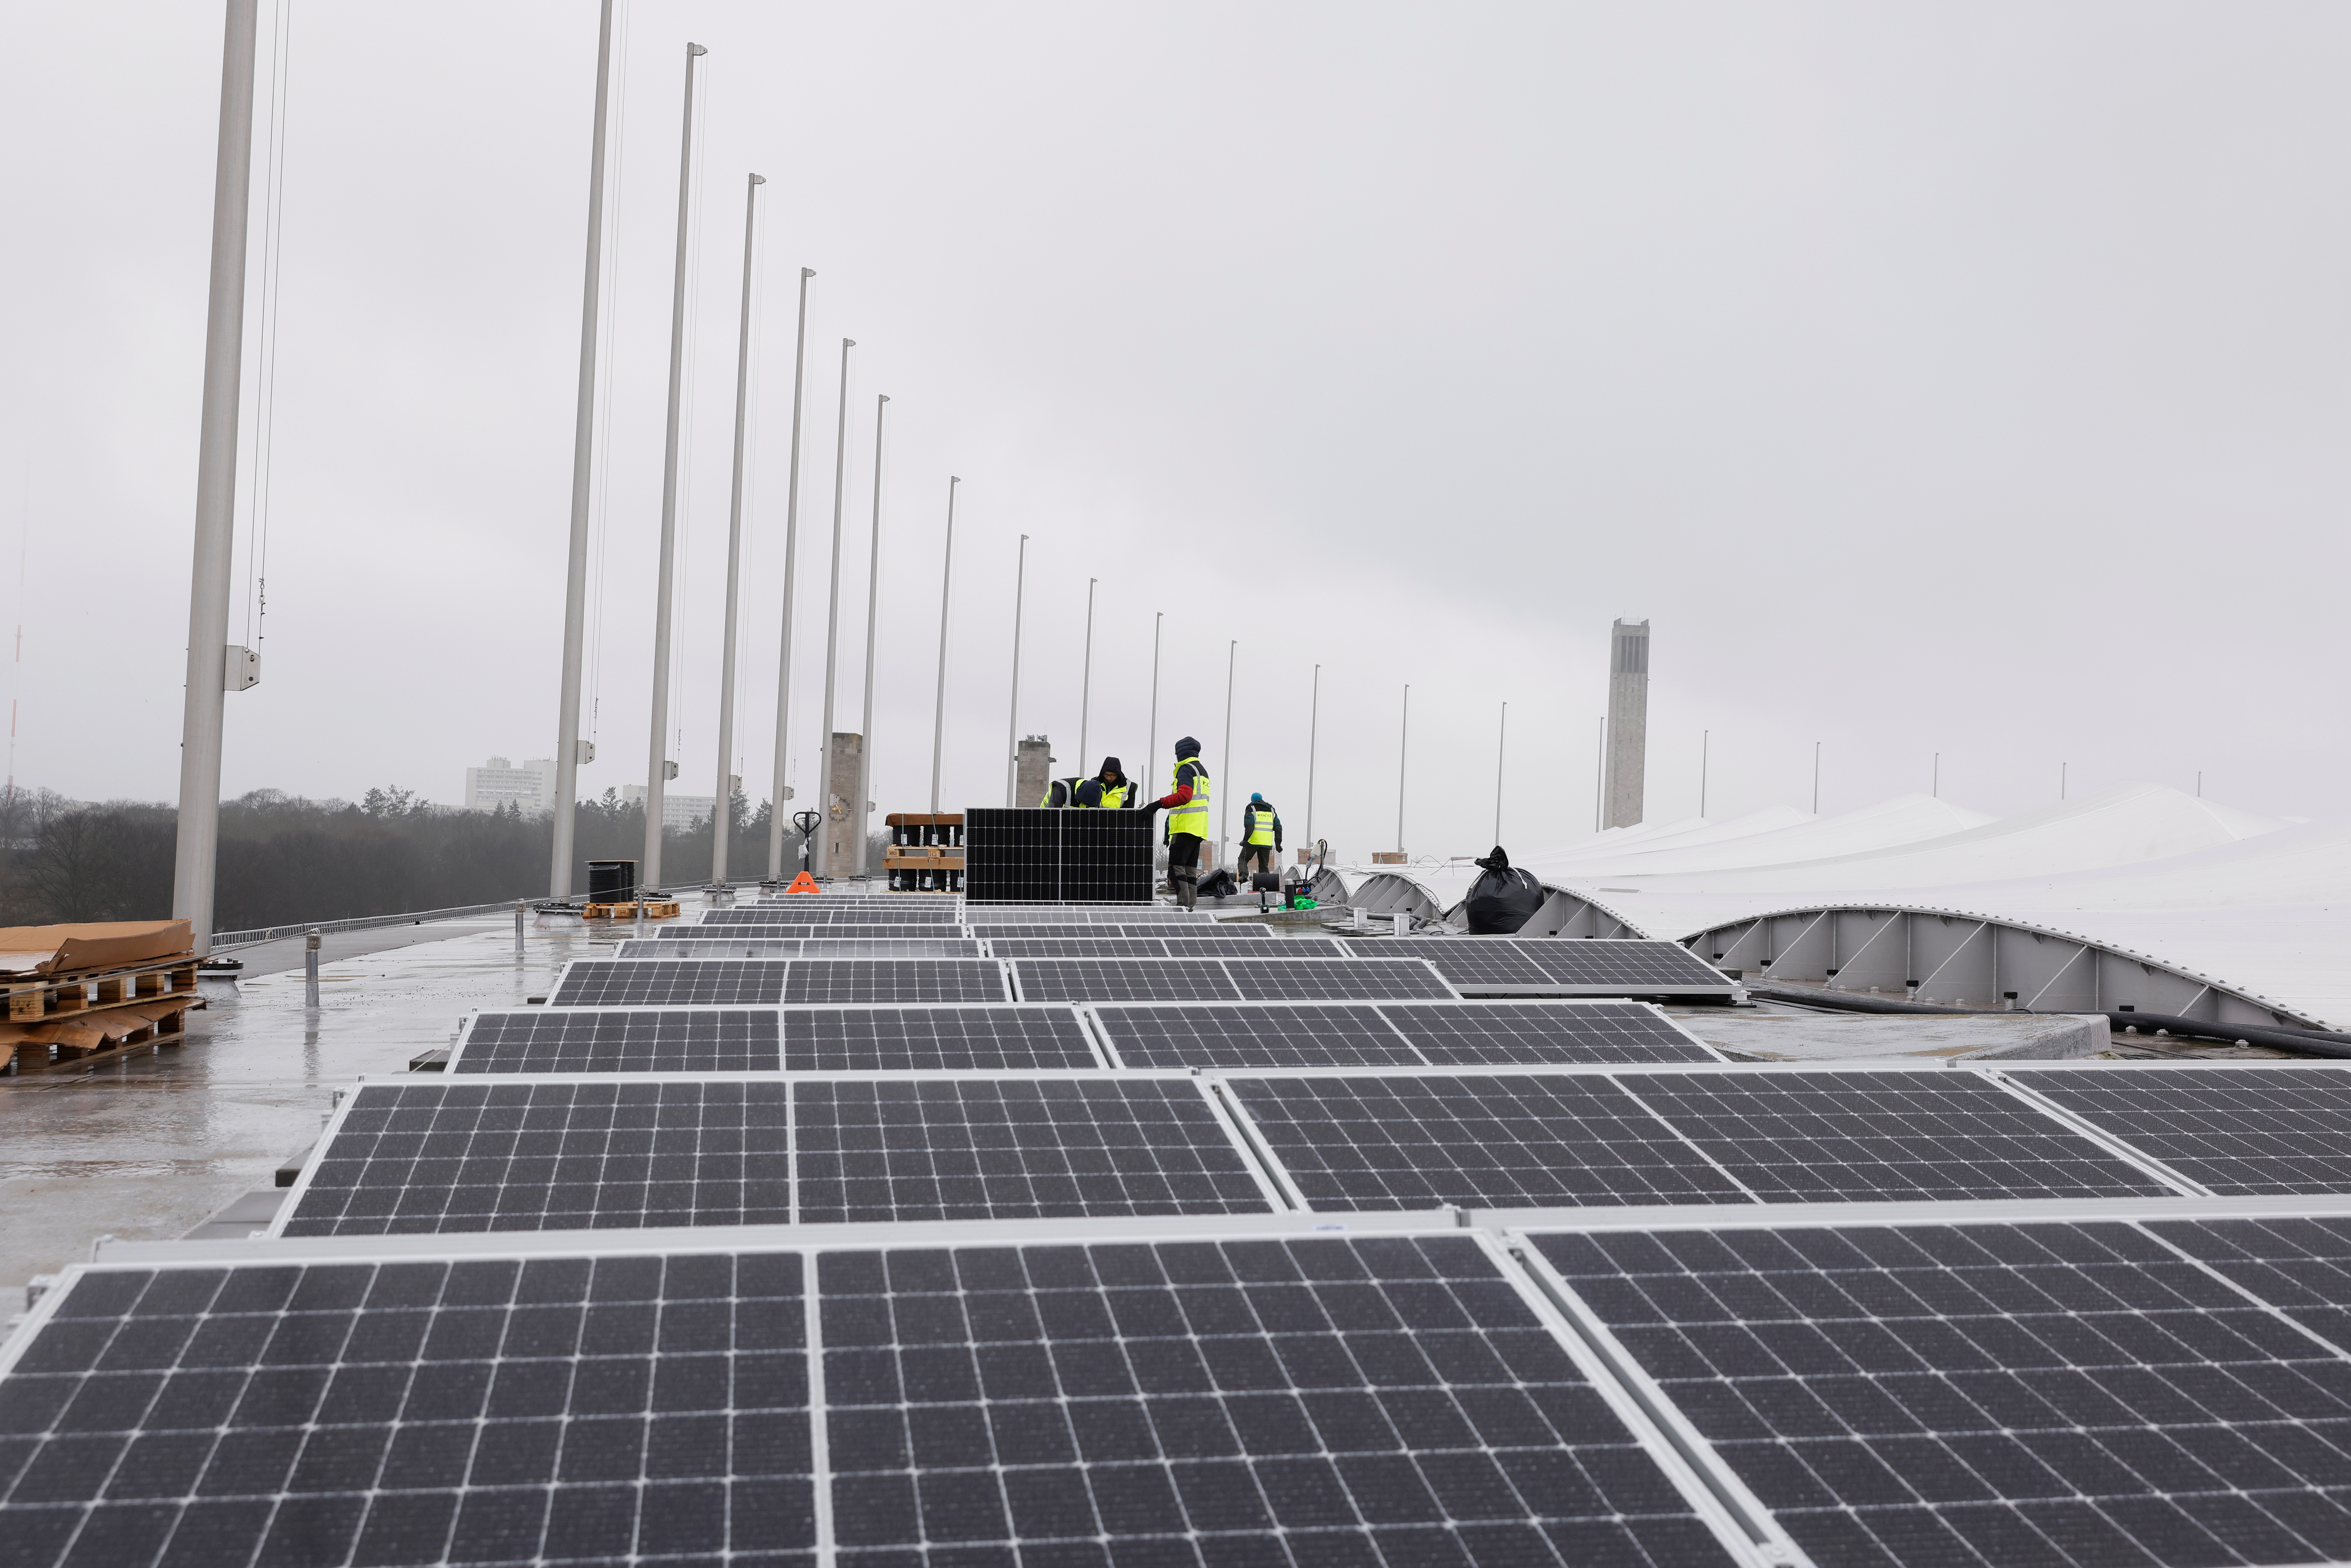 Workers mount solar panels on the roof of the Olympic Stadium or Olympiastadion in Berlin